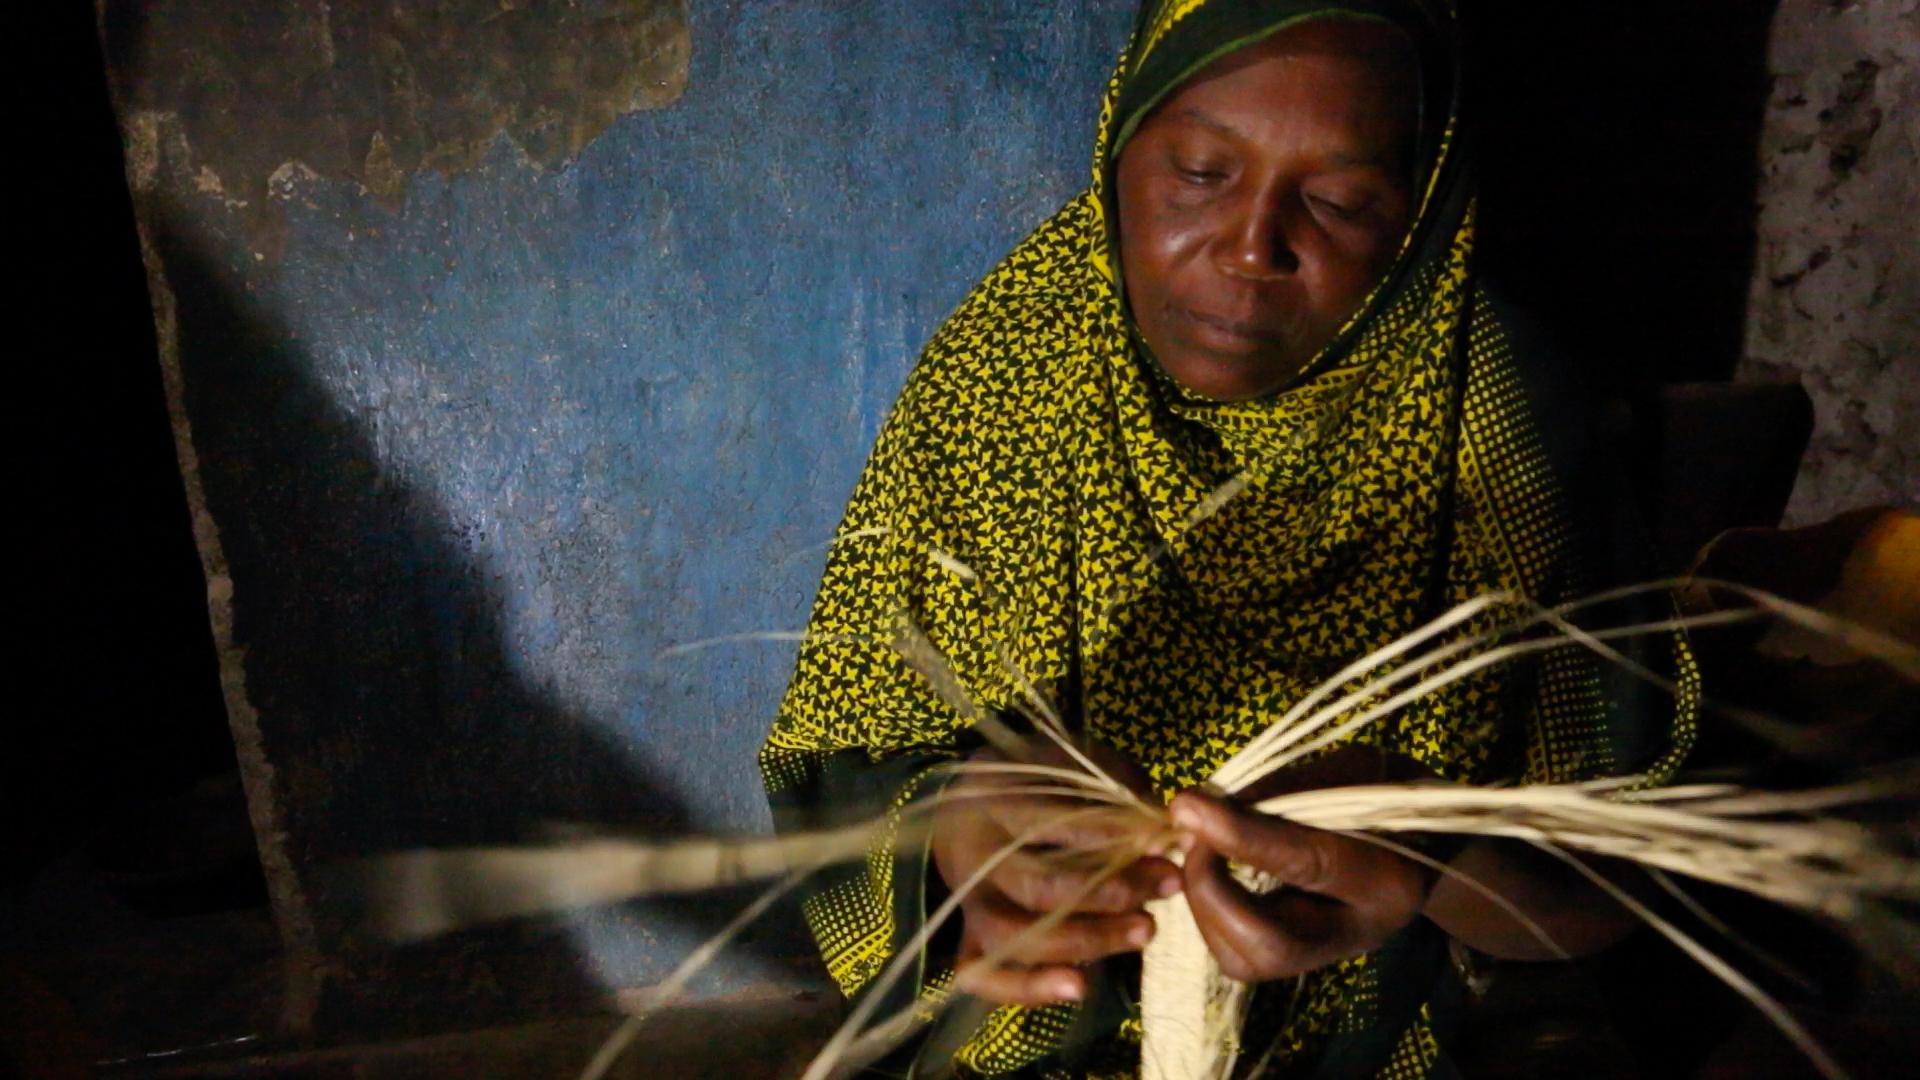 Kanoa Sharif Haji, a 45 year old mother of eight, weaves reed mats at night under a bright solar powered LED light at her home in Matemwe. This new work at night earns her family an extra fifteen dollars a month, a huge amount in these parts.